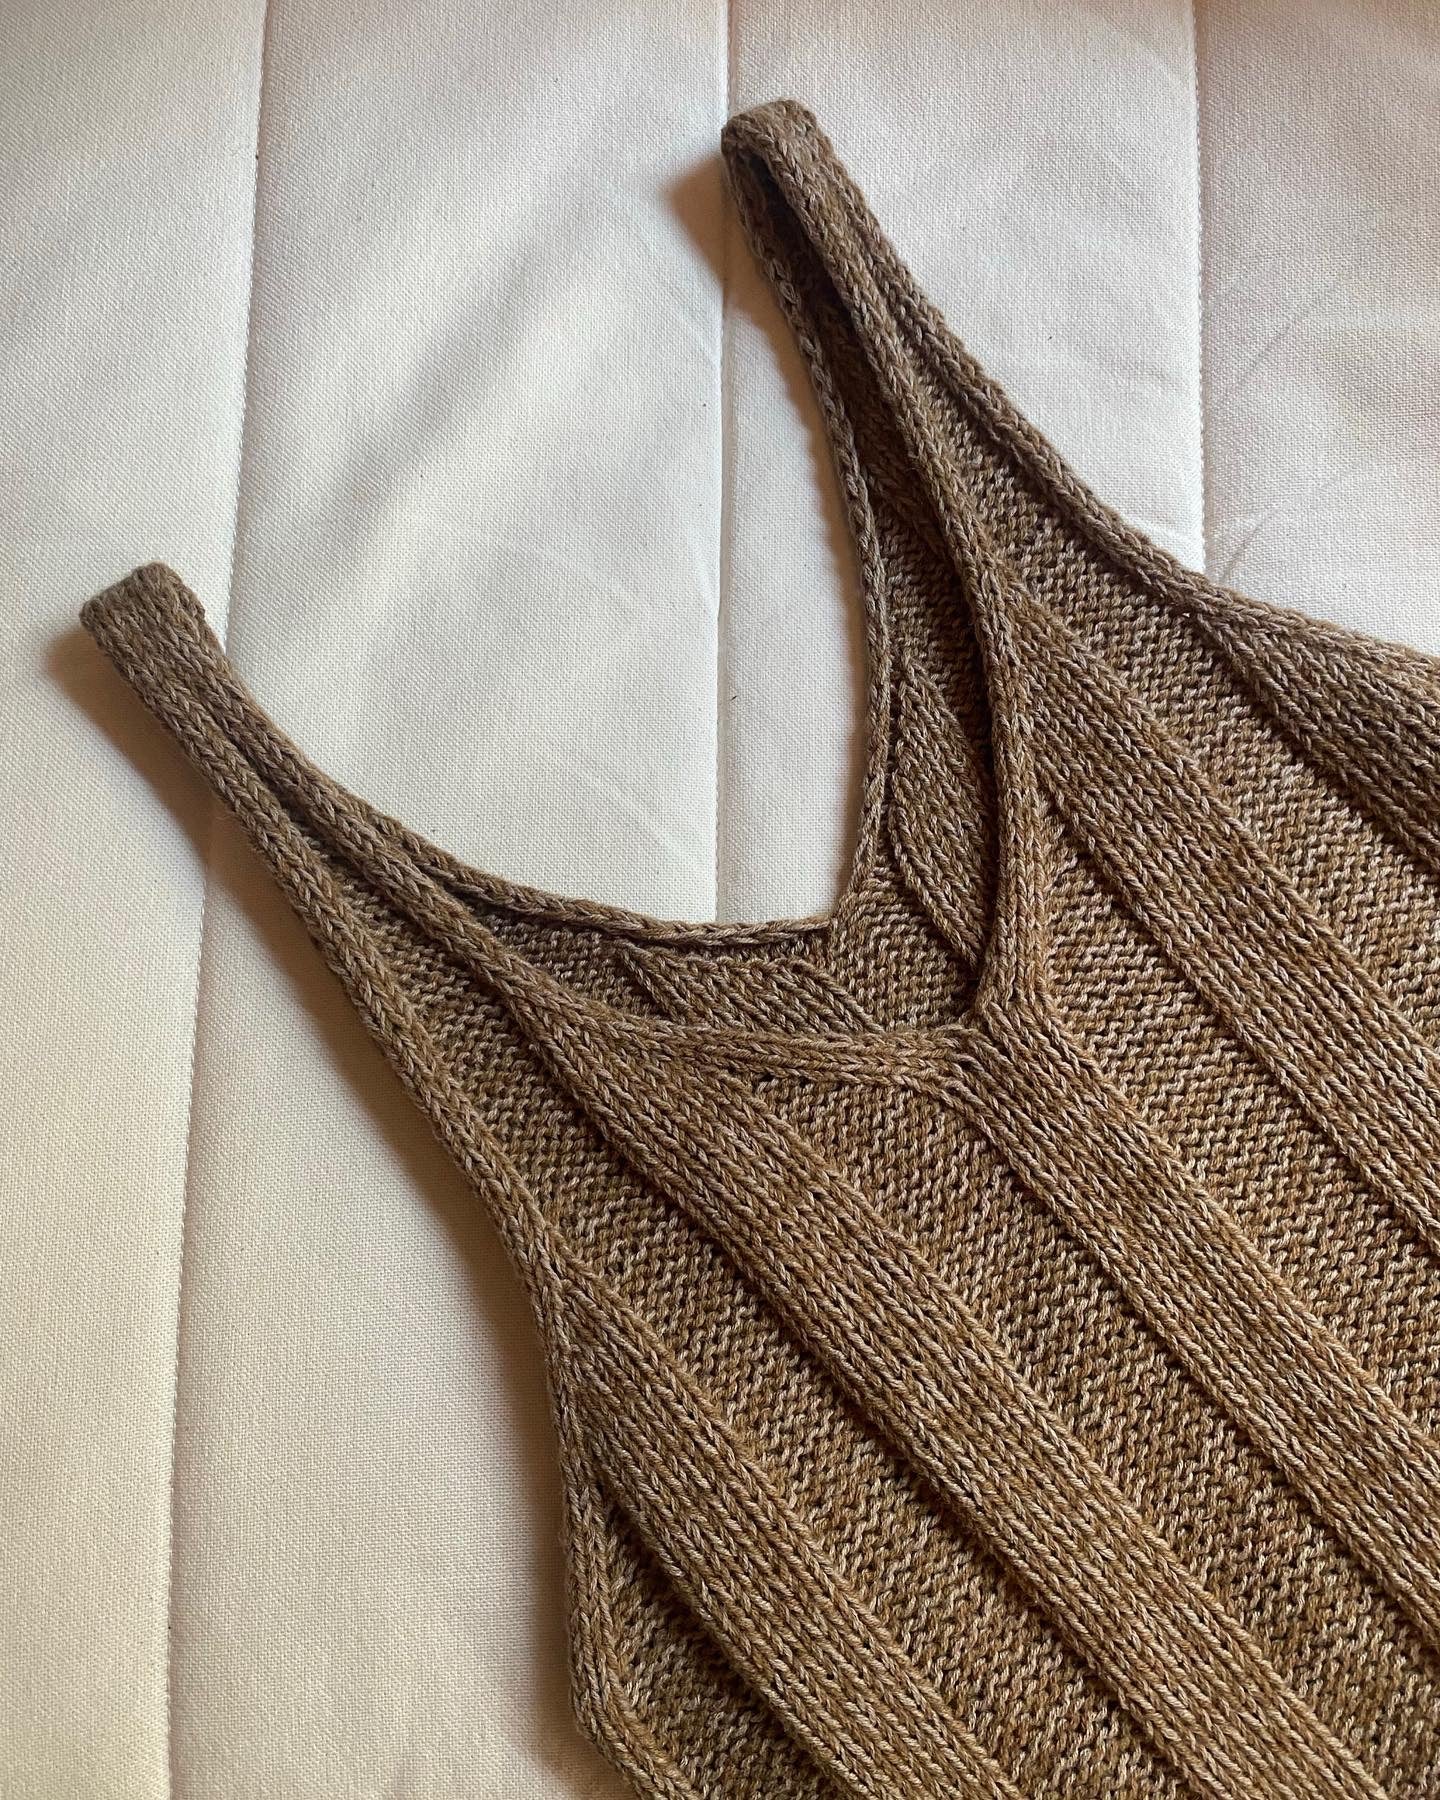 Camisole No. 6 - Knitting Pattern in English – • MY FAVOURITE THINGS •  KNITWEAR